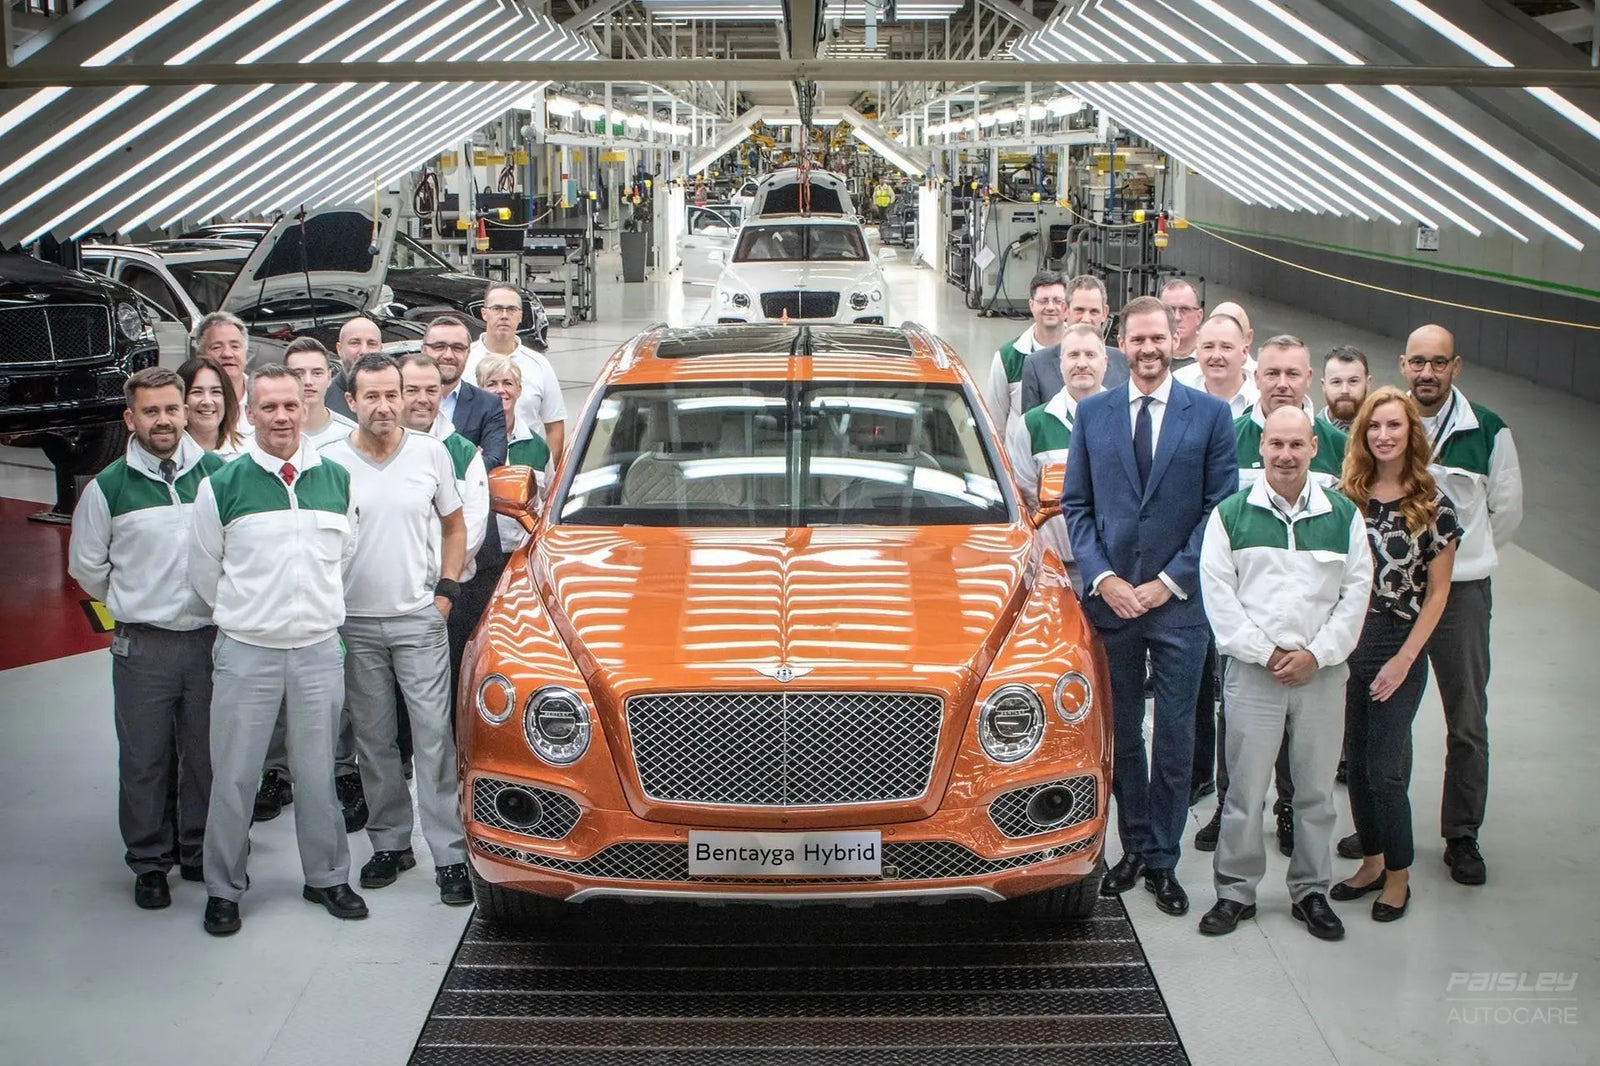 Bentley Go Green by 2030 | Paisley Autocare